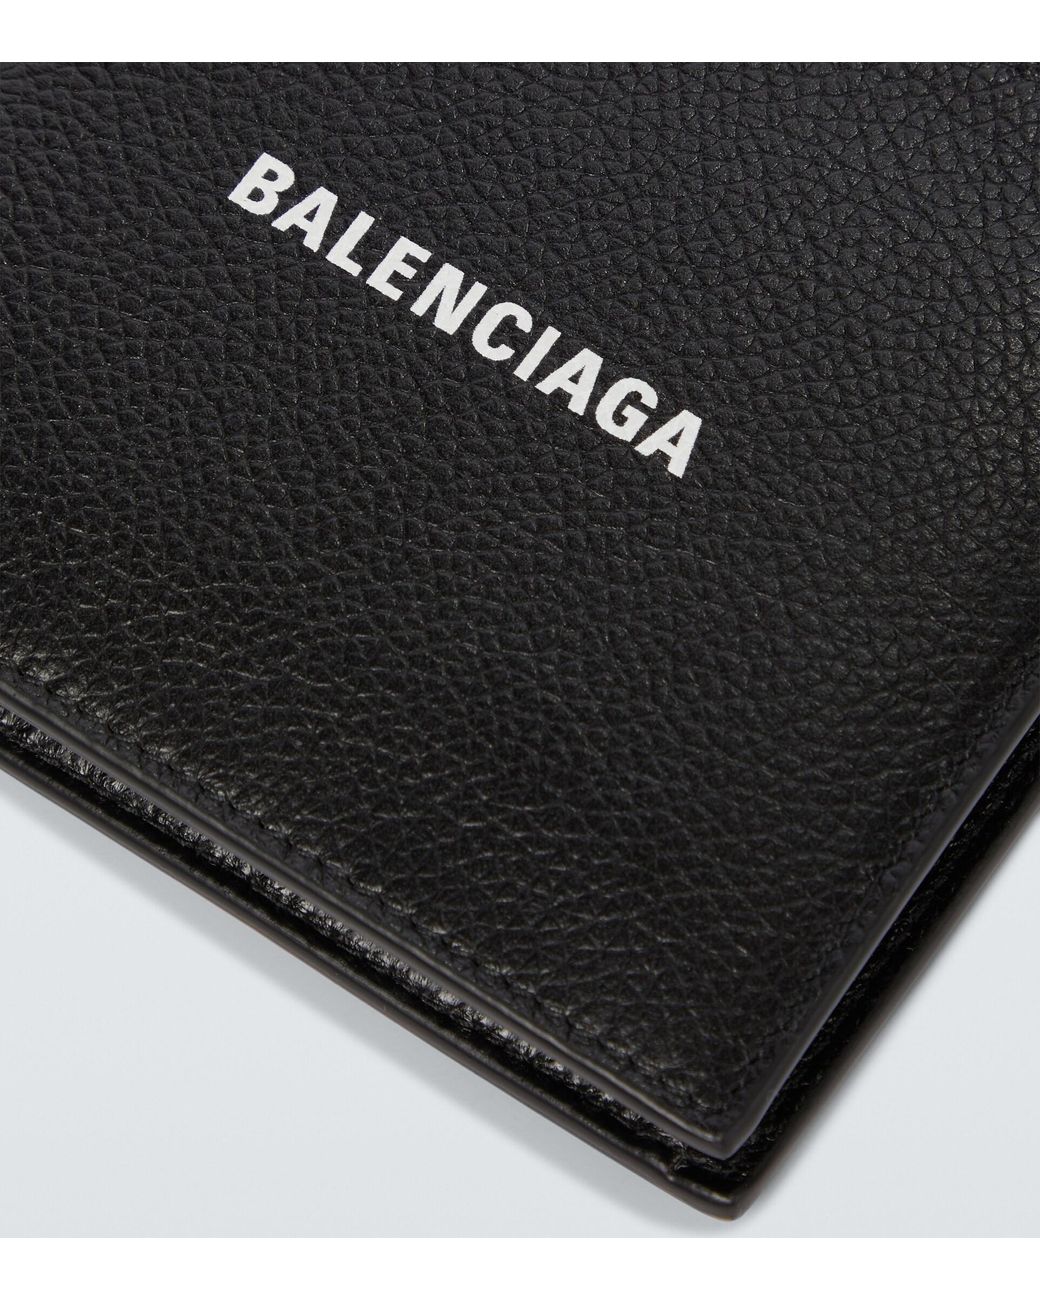 Balenciaga Leather Cash Square Folded Coin Wallet in Black for Men | Lyst